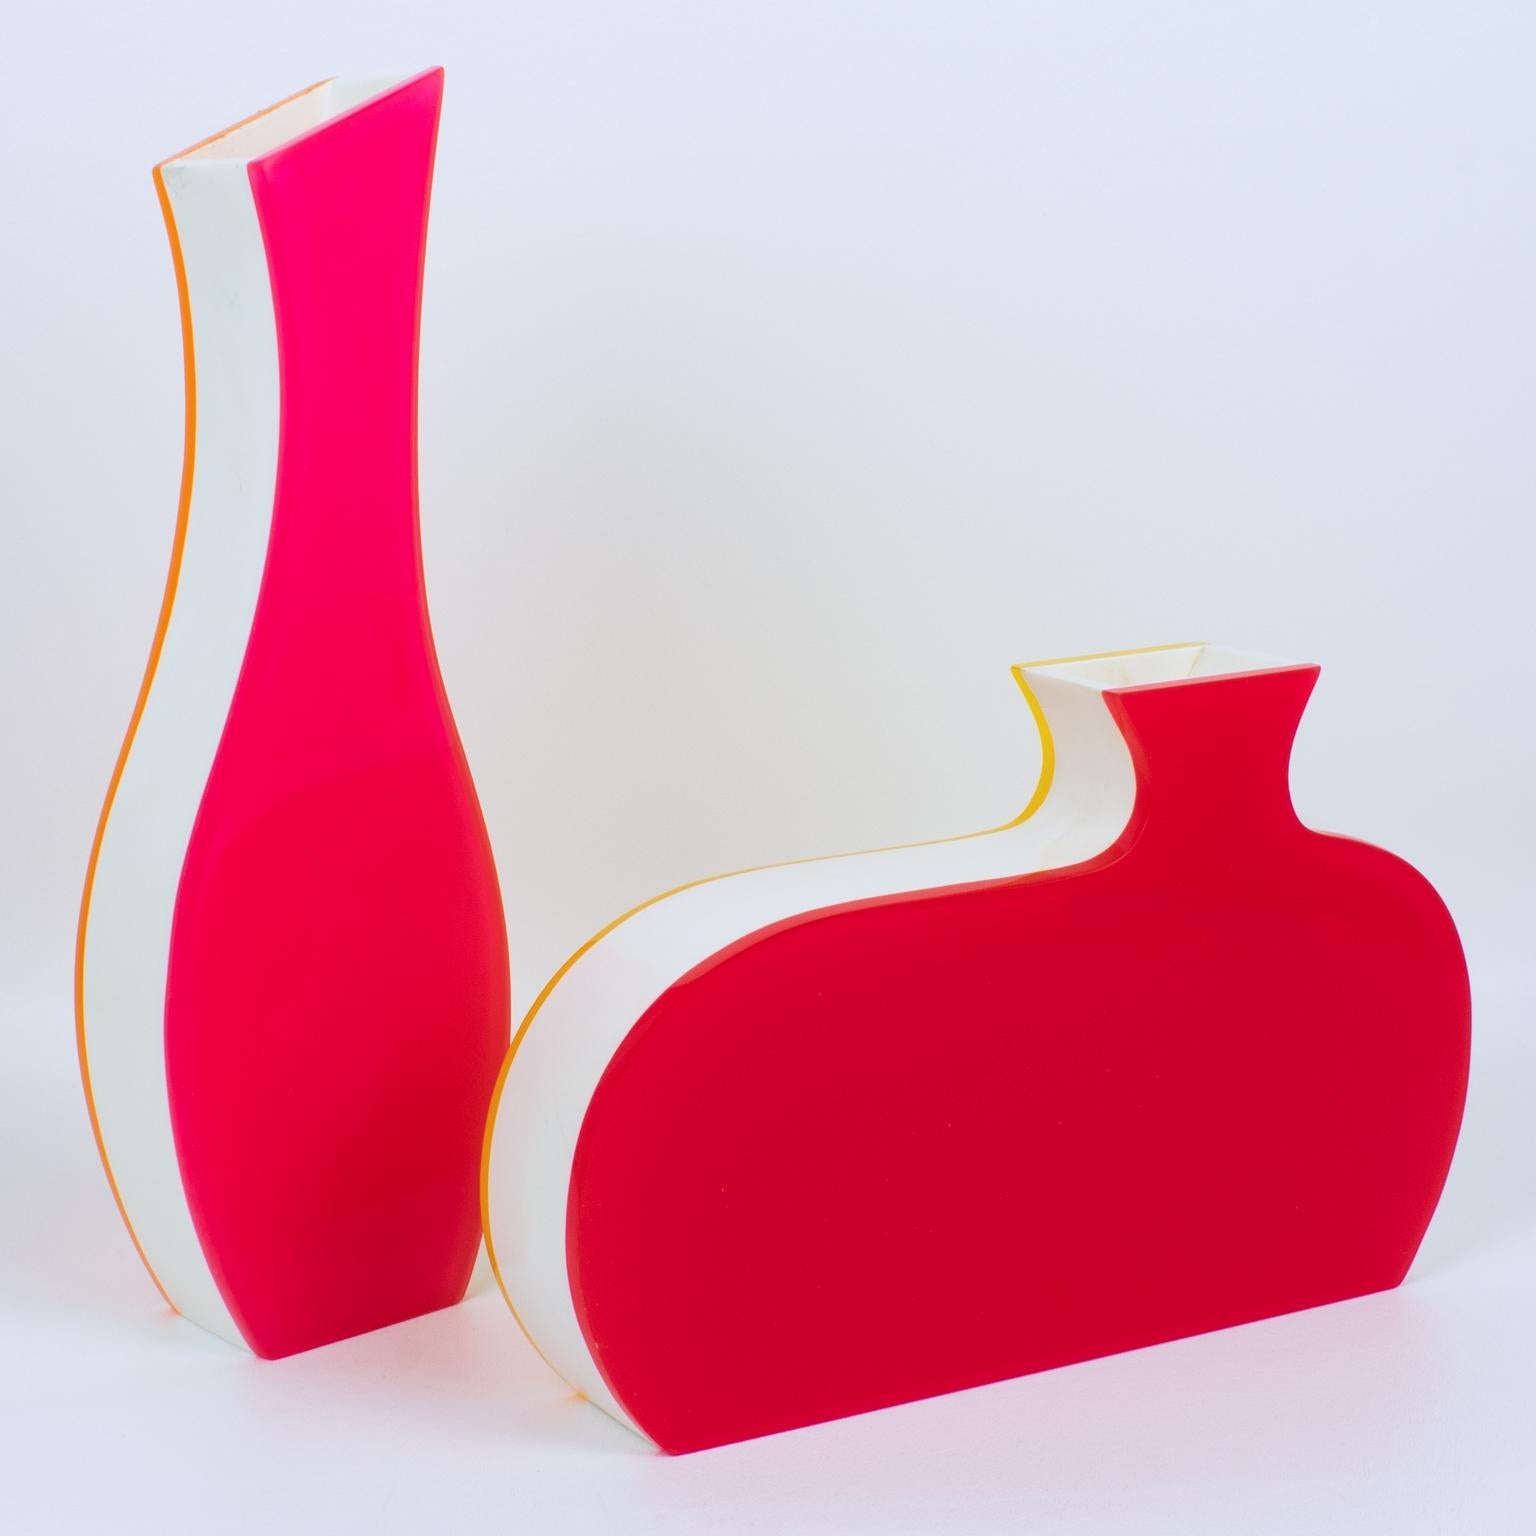 Villeroy & Boch produced that stunning pair of vases in the 1990s. This playful design is modern with an incredible color combination. Each vase has a multilayer sandwich shape of Acrylic, Lucite, or Plexiglass in white, yellow, orange, neon red,